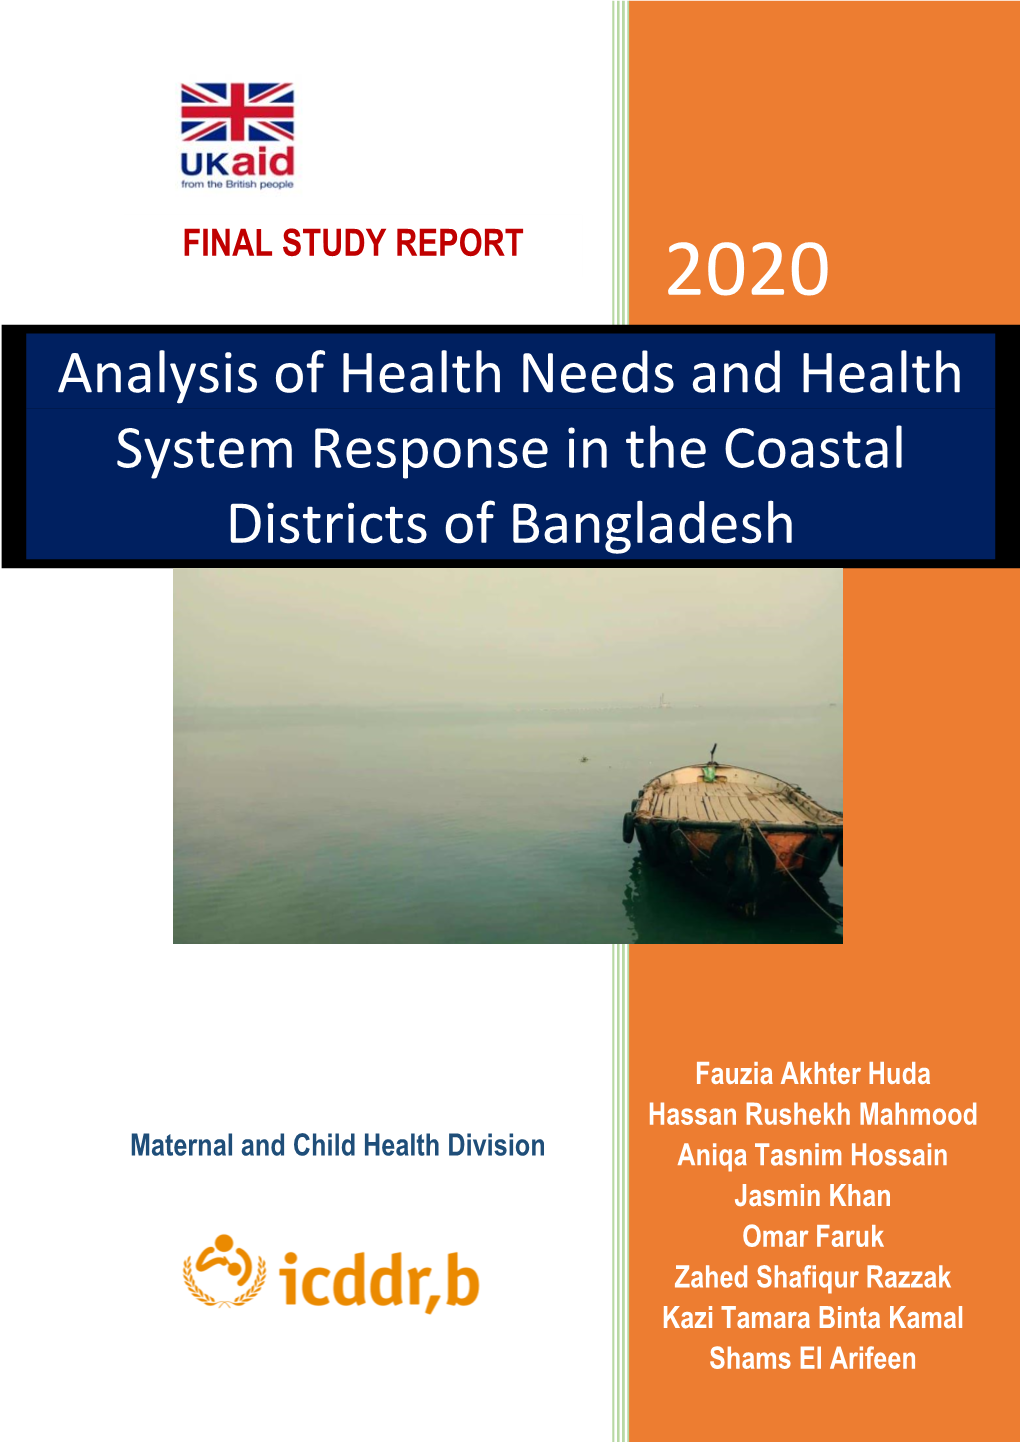 Analysis of Health Needs and Health System Response in the Coastal Districts of Bangladesh